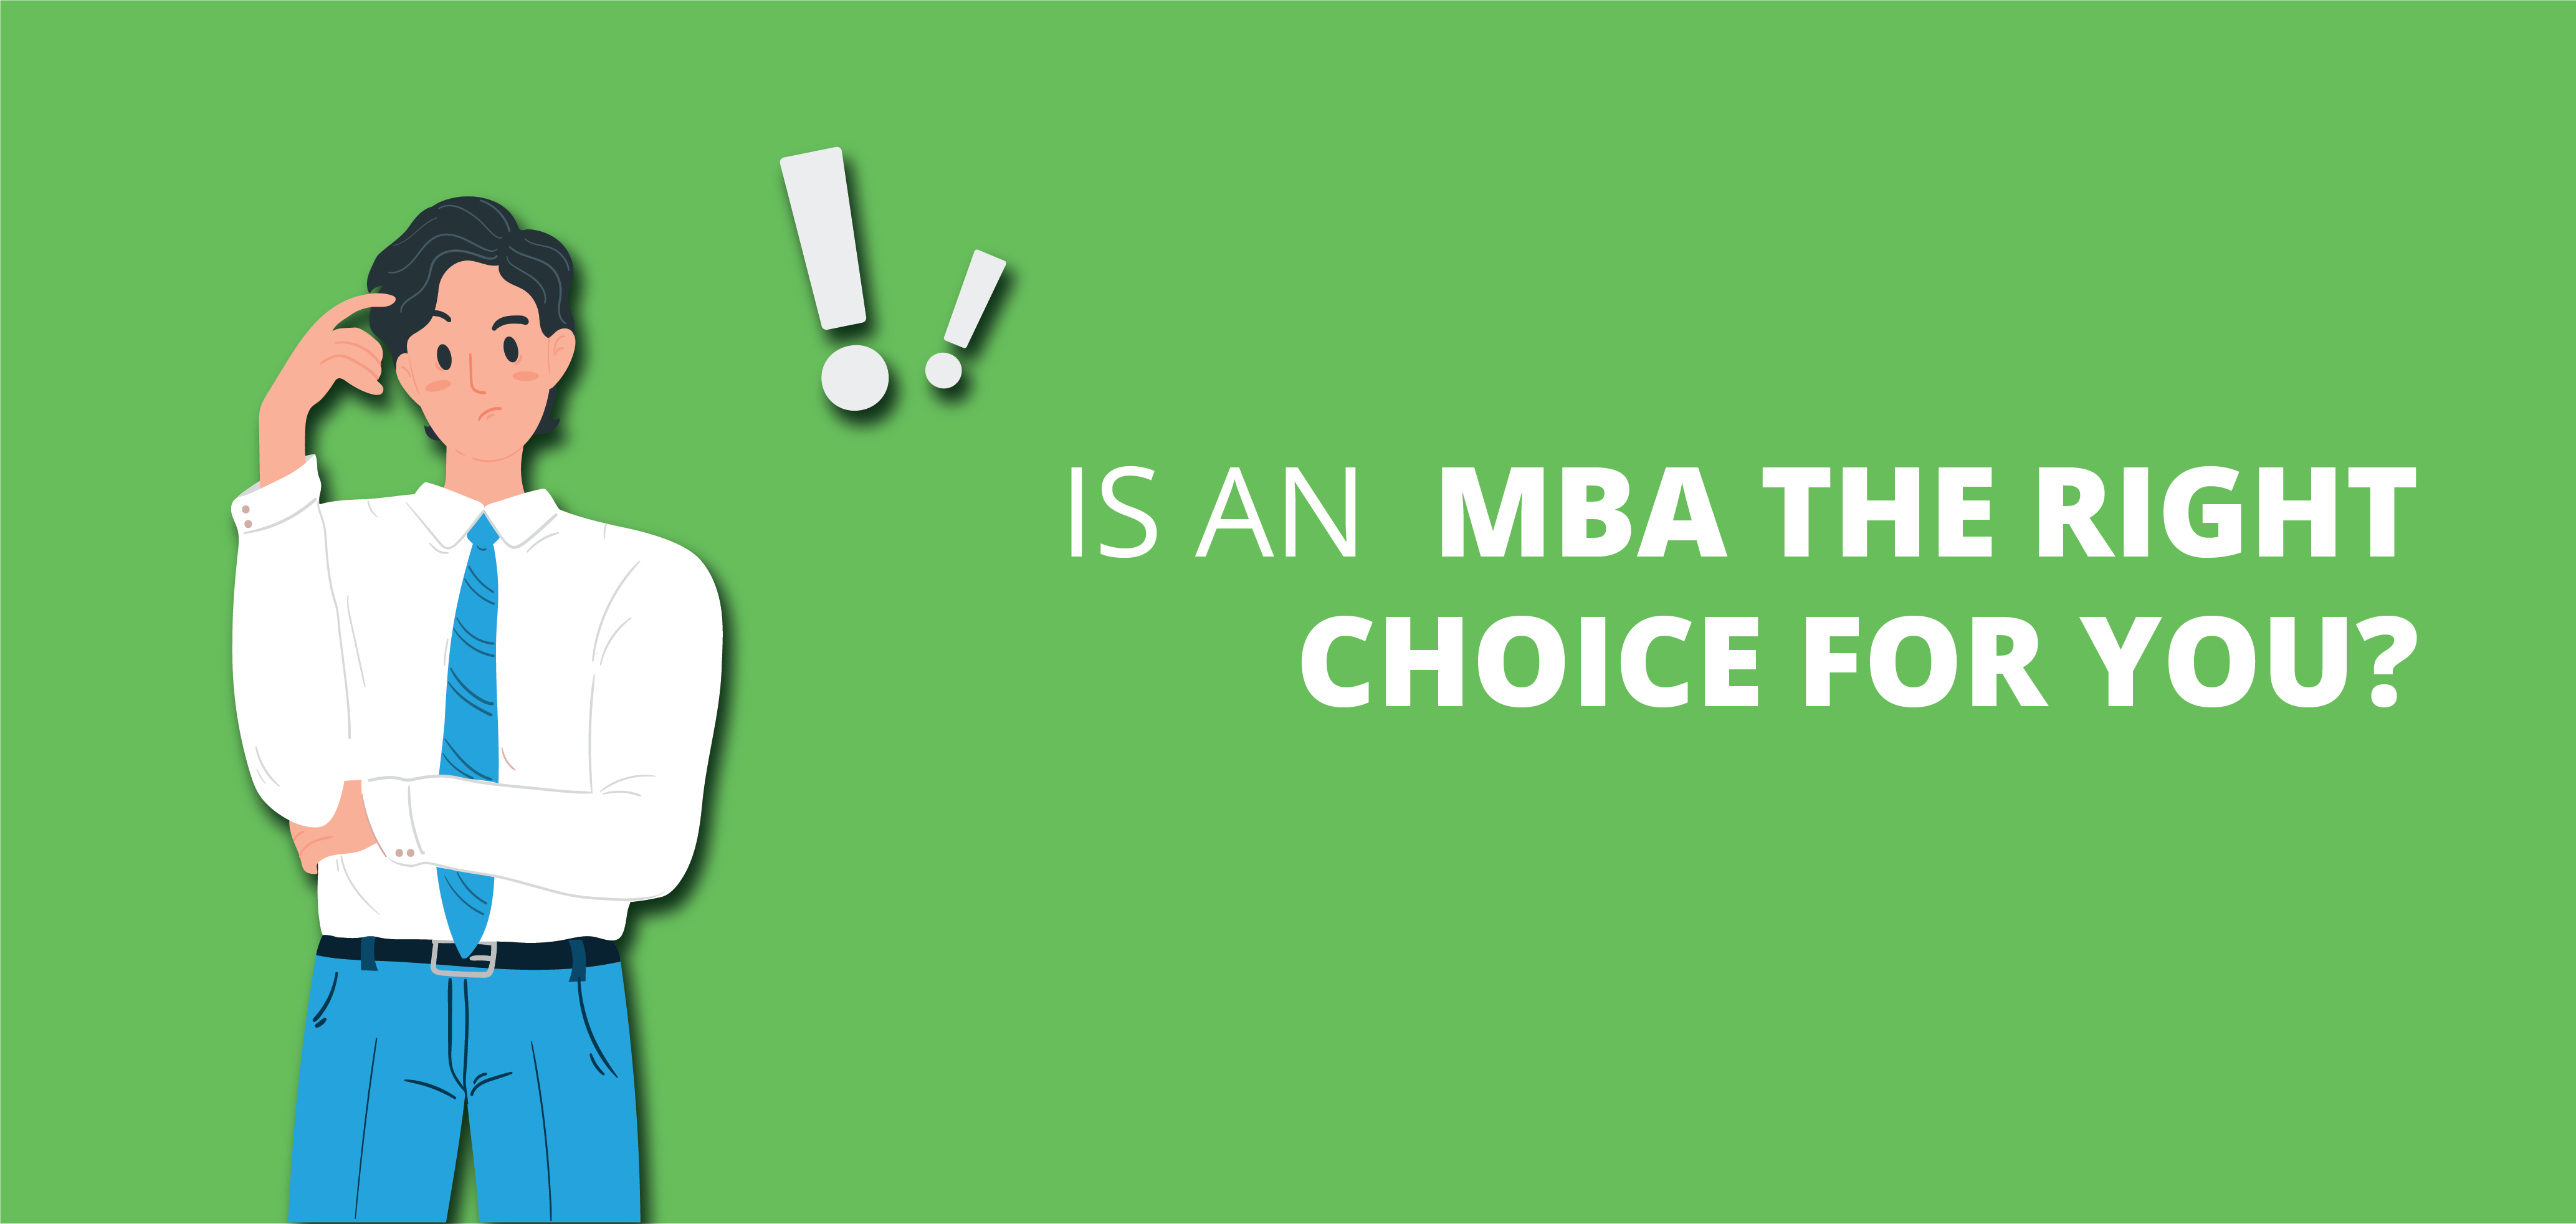 Top Reasons not to do an MBA